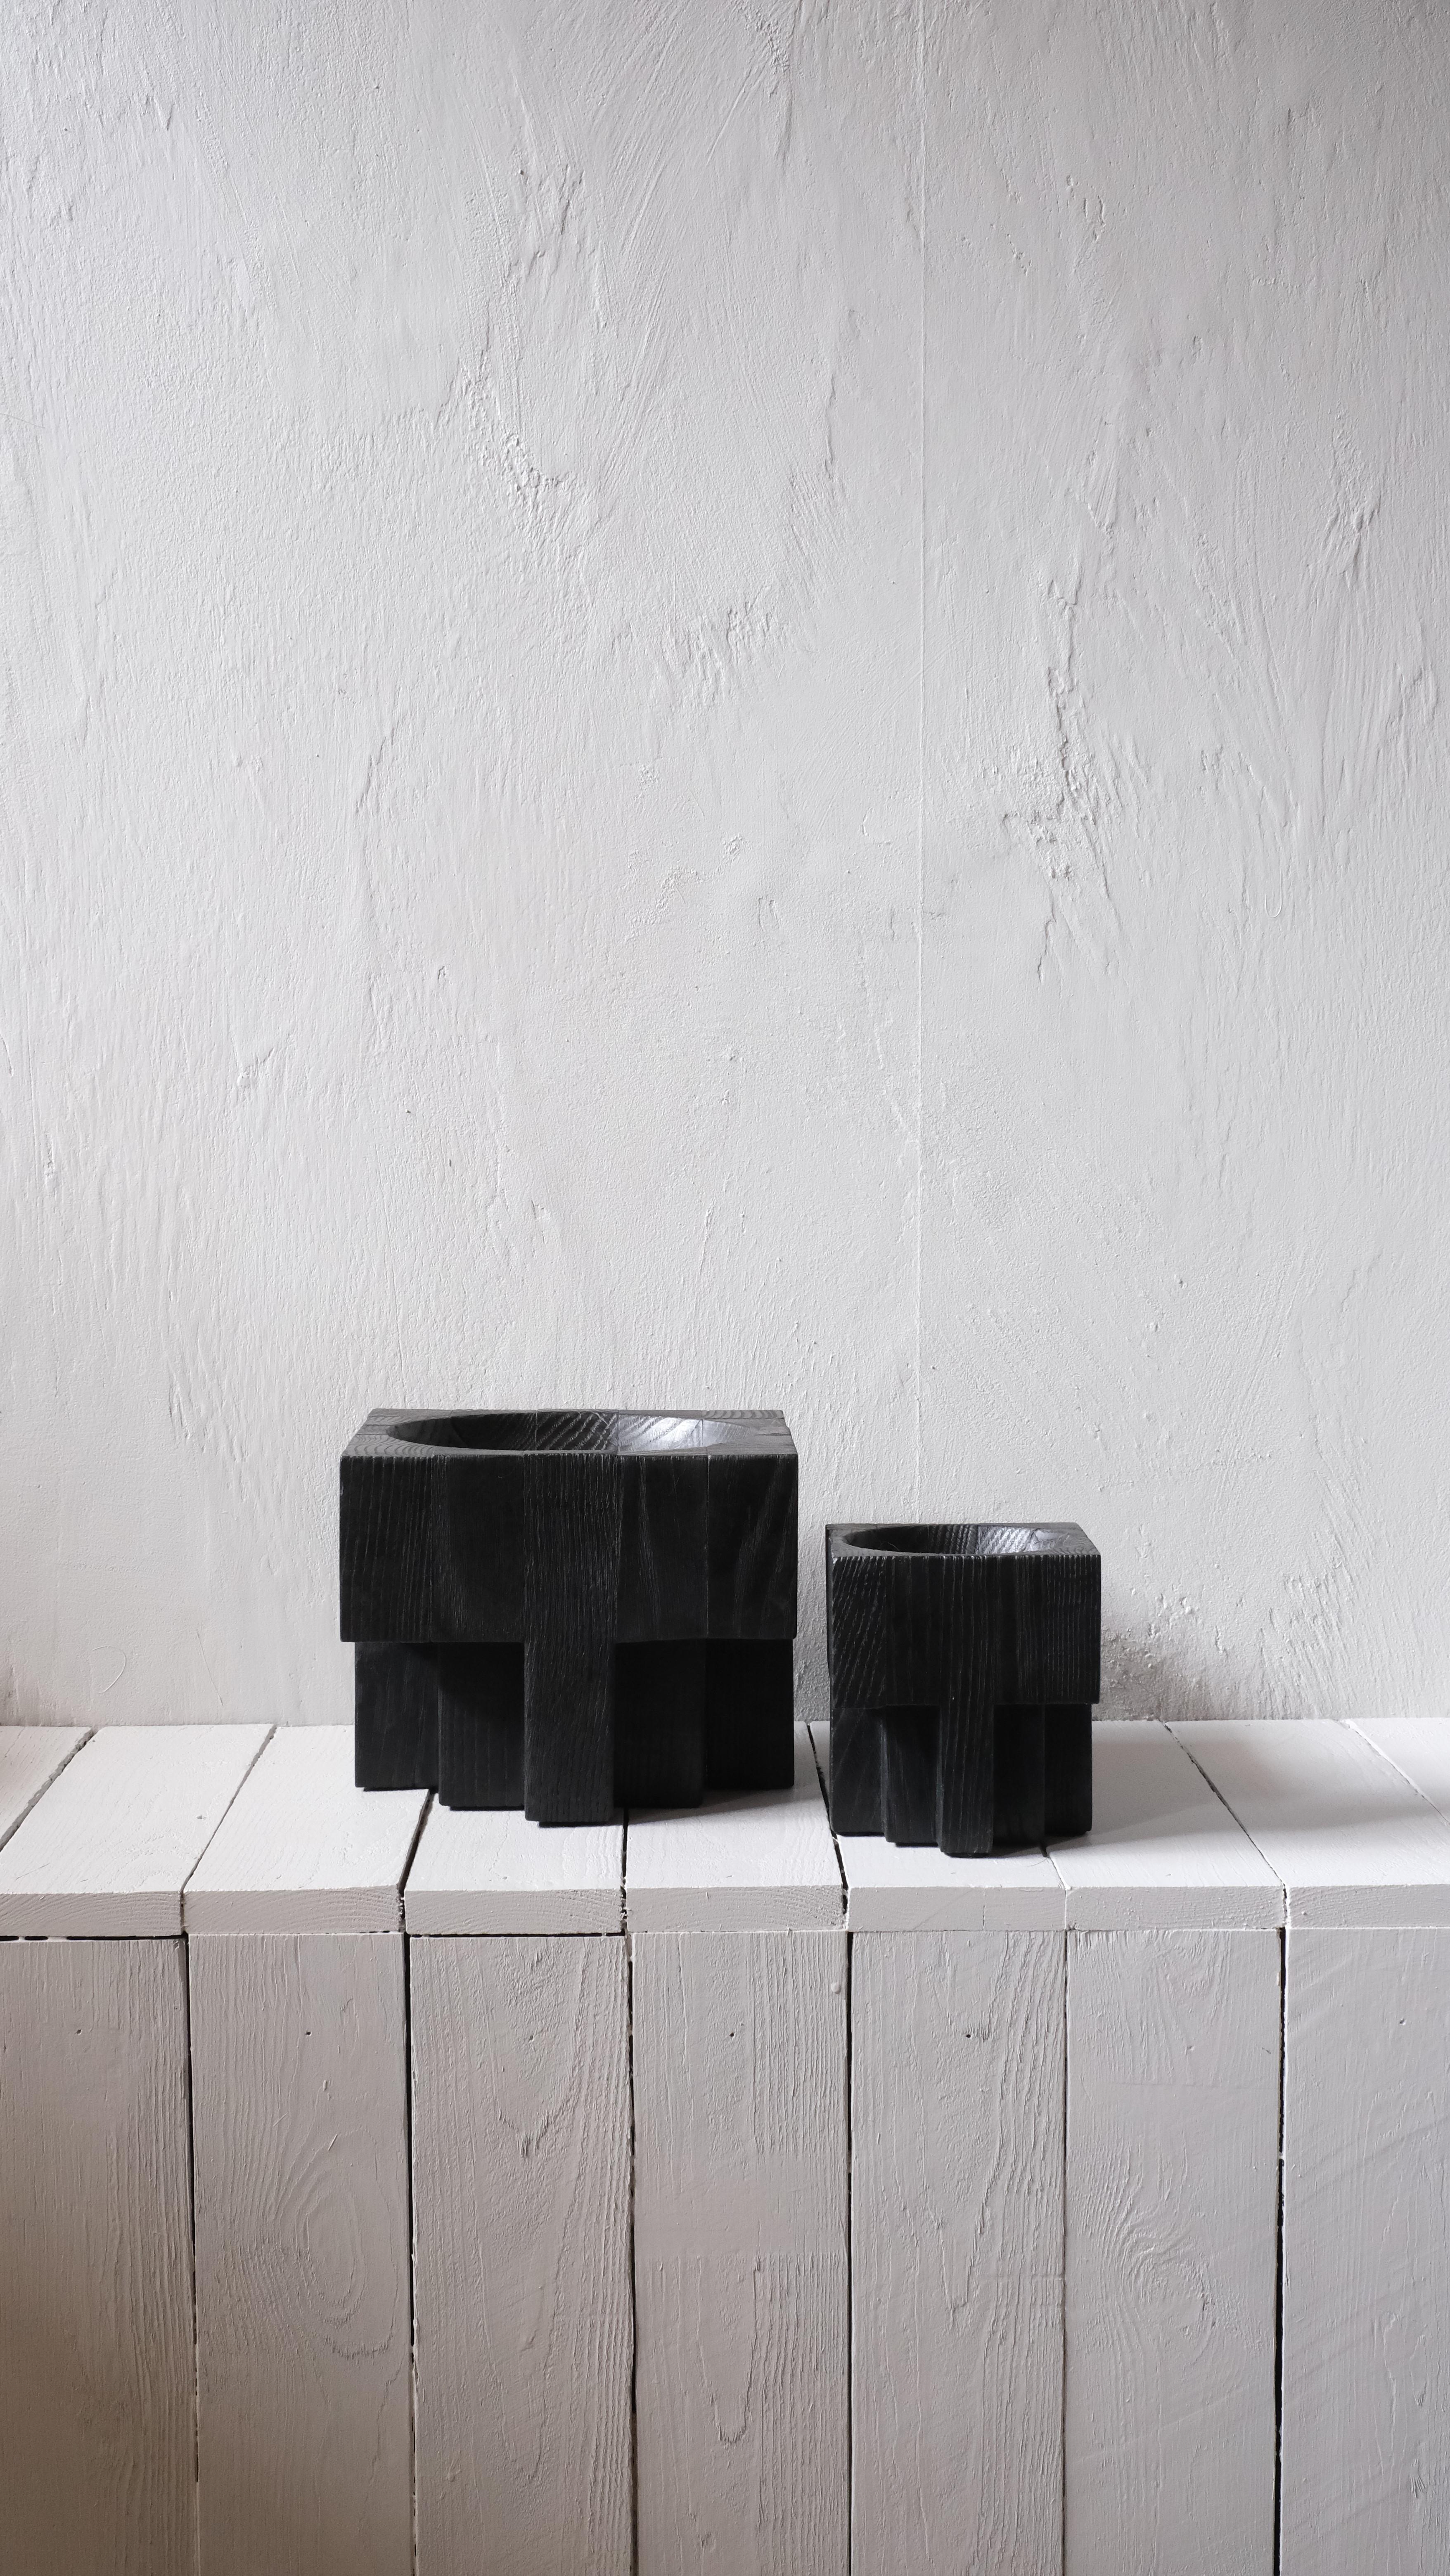 Cross pots large by Arno Declercq
The price is for one large item

Measures:
Small 13 cm L x 13 cm W x 15 cm H
5” L x 5” W x 5.9” H

Large 21 cm L x 21 cm W x 18 cm H
8.2